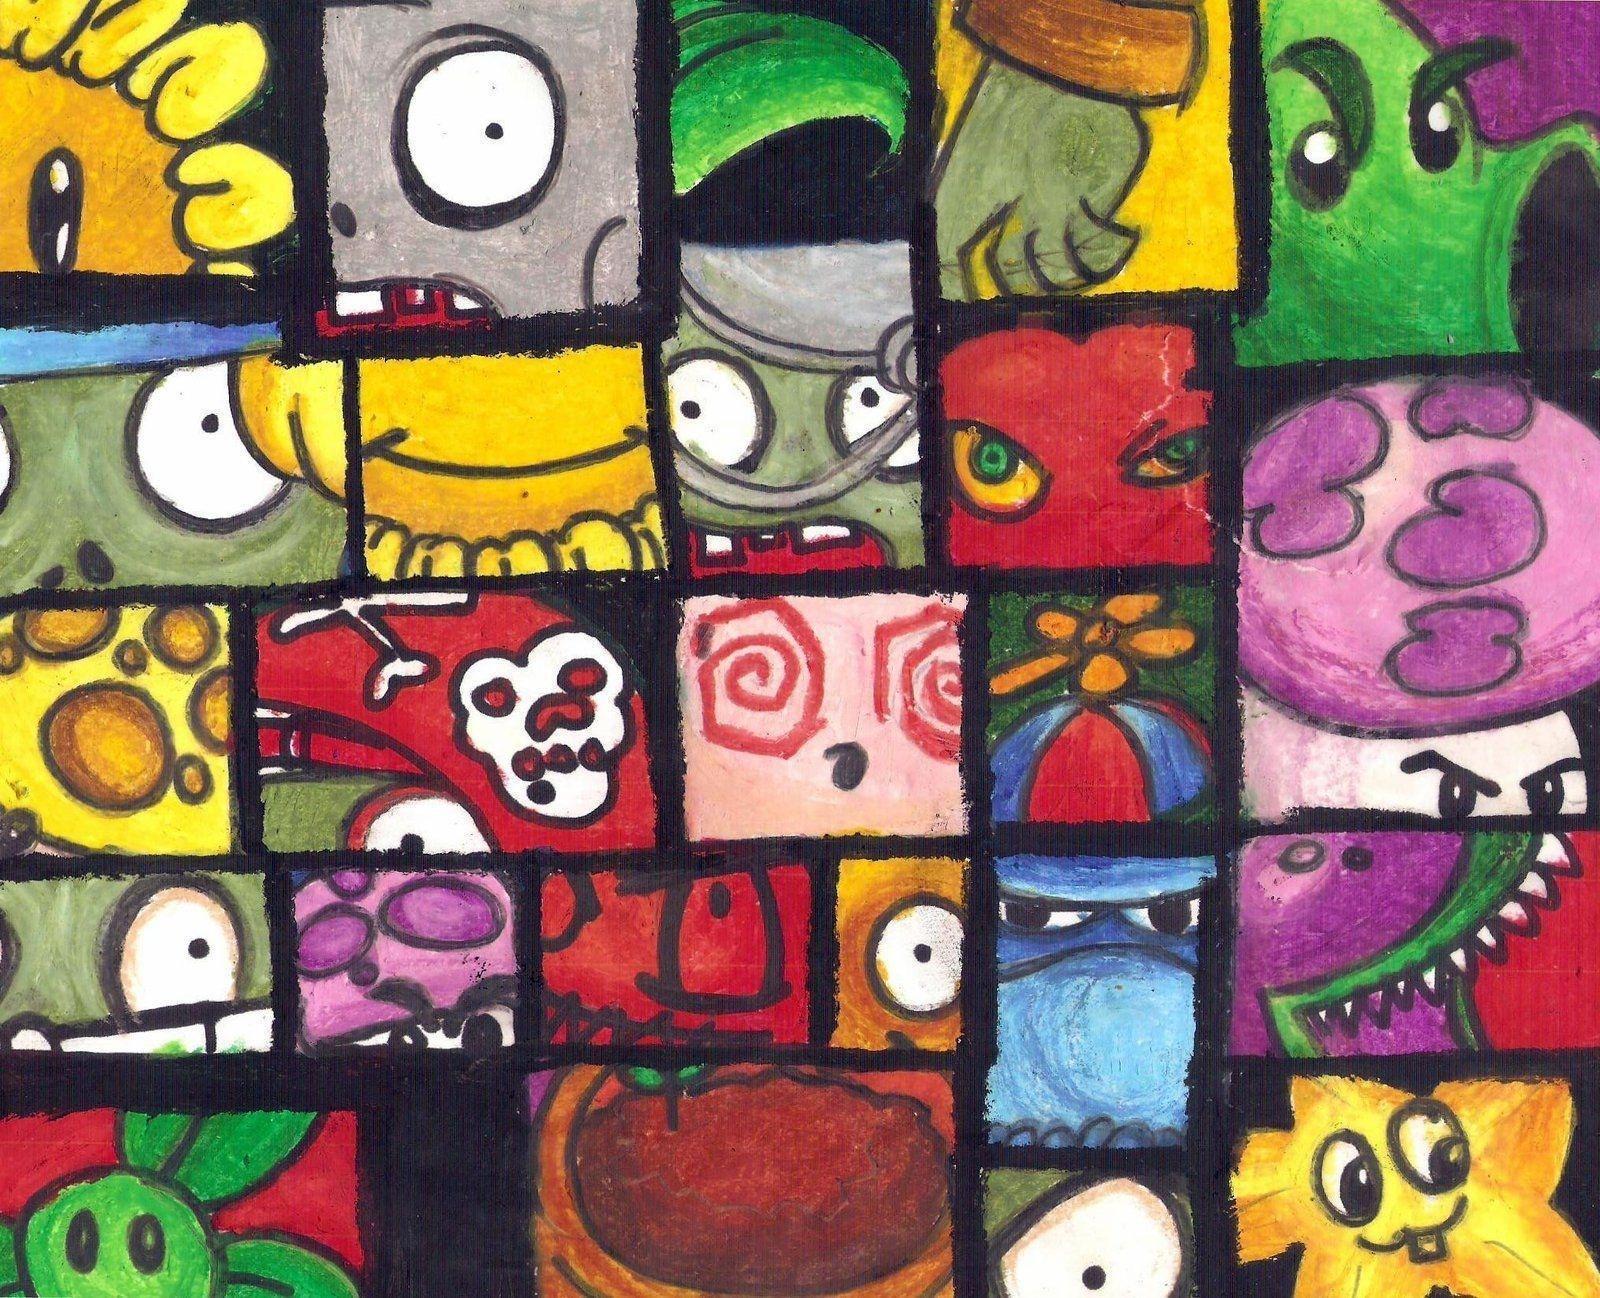 plants vs zombies wallpaper pack para pc Wallppapers Gallery